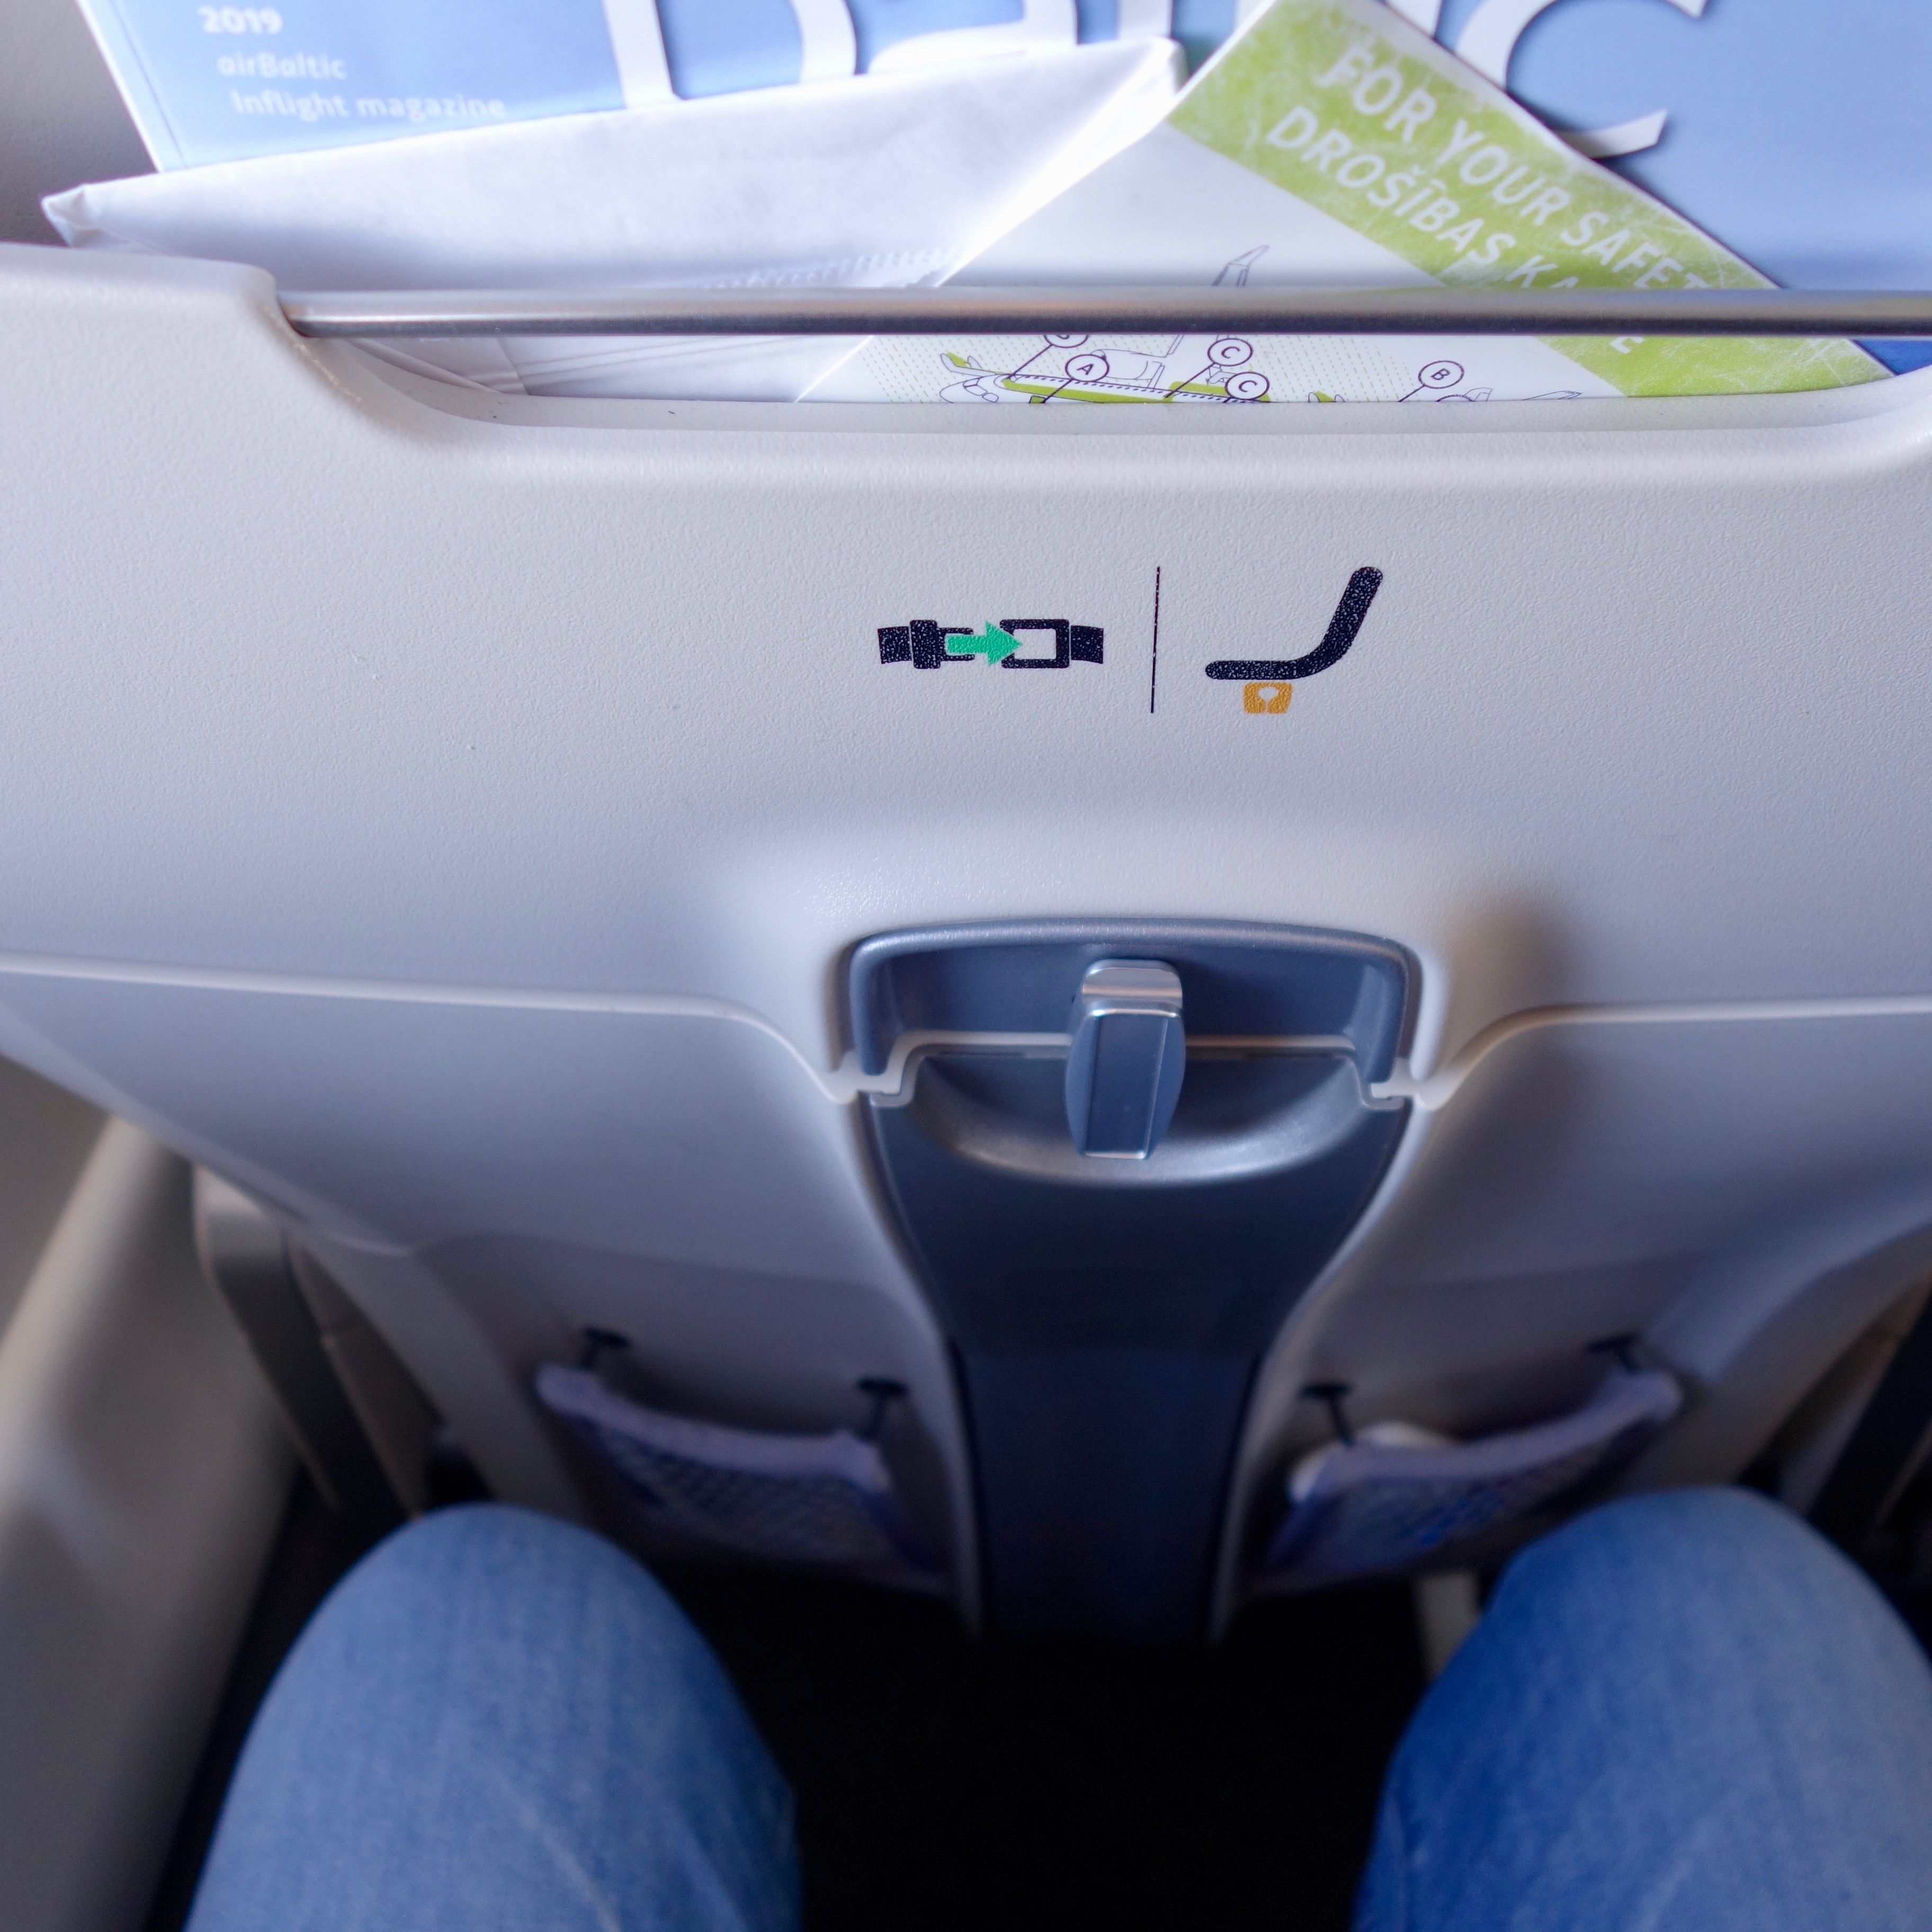 This photo is designed to review the amount of legroom available on the airBaltic Airbus A220 aircraft. In this case, the knees of the passenger do not touch the seat ahead, indicating legroom is comfortable enough for a short flight.  